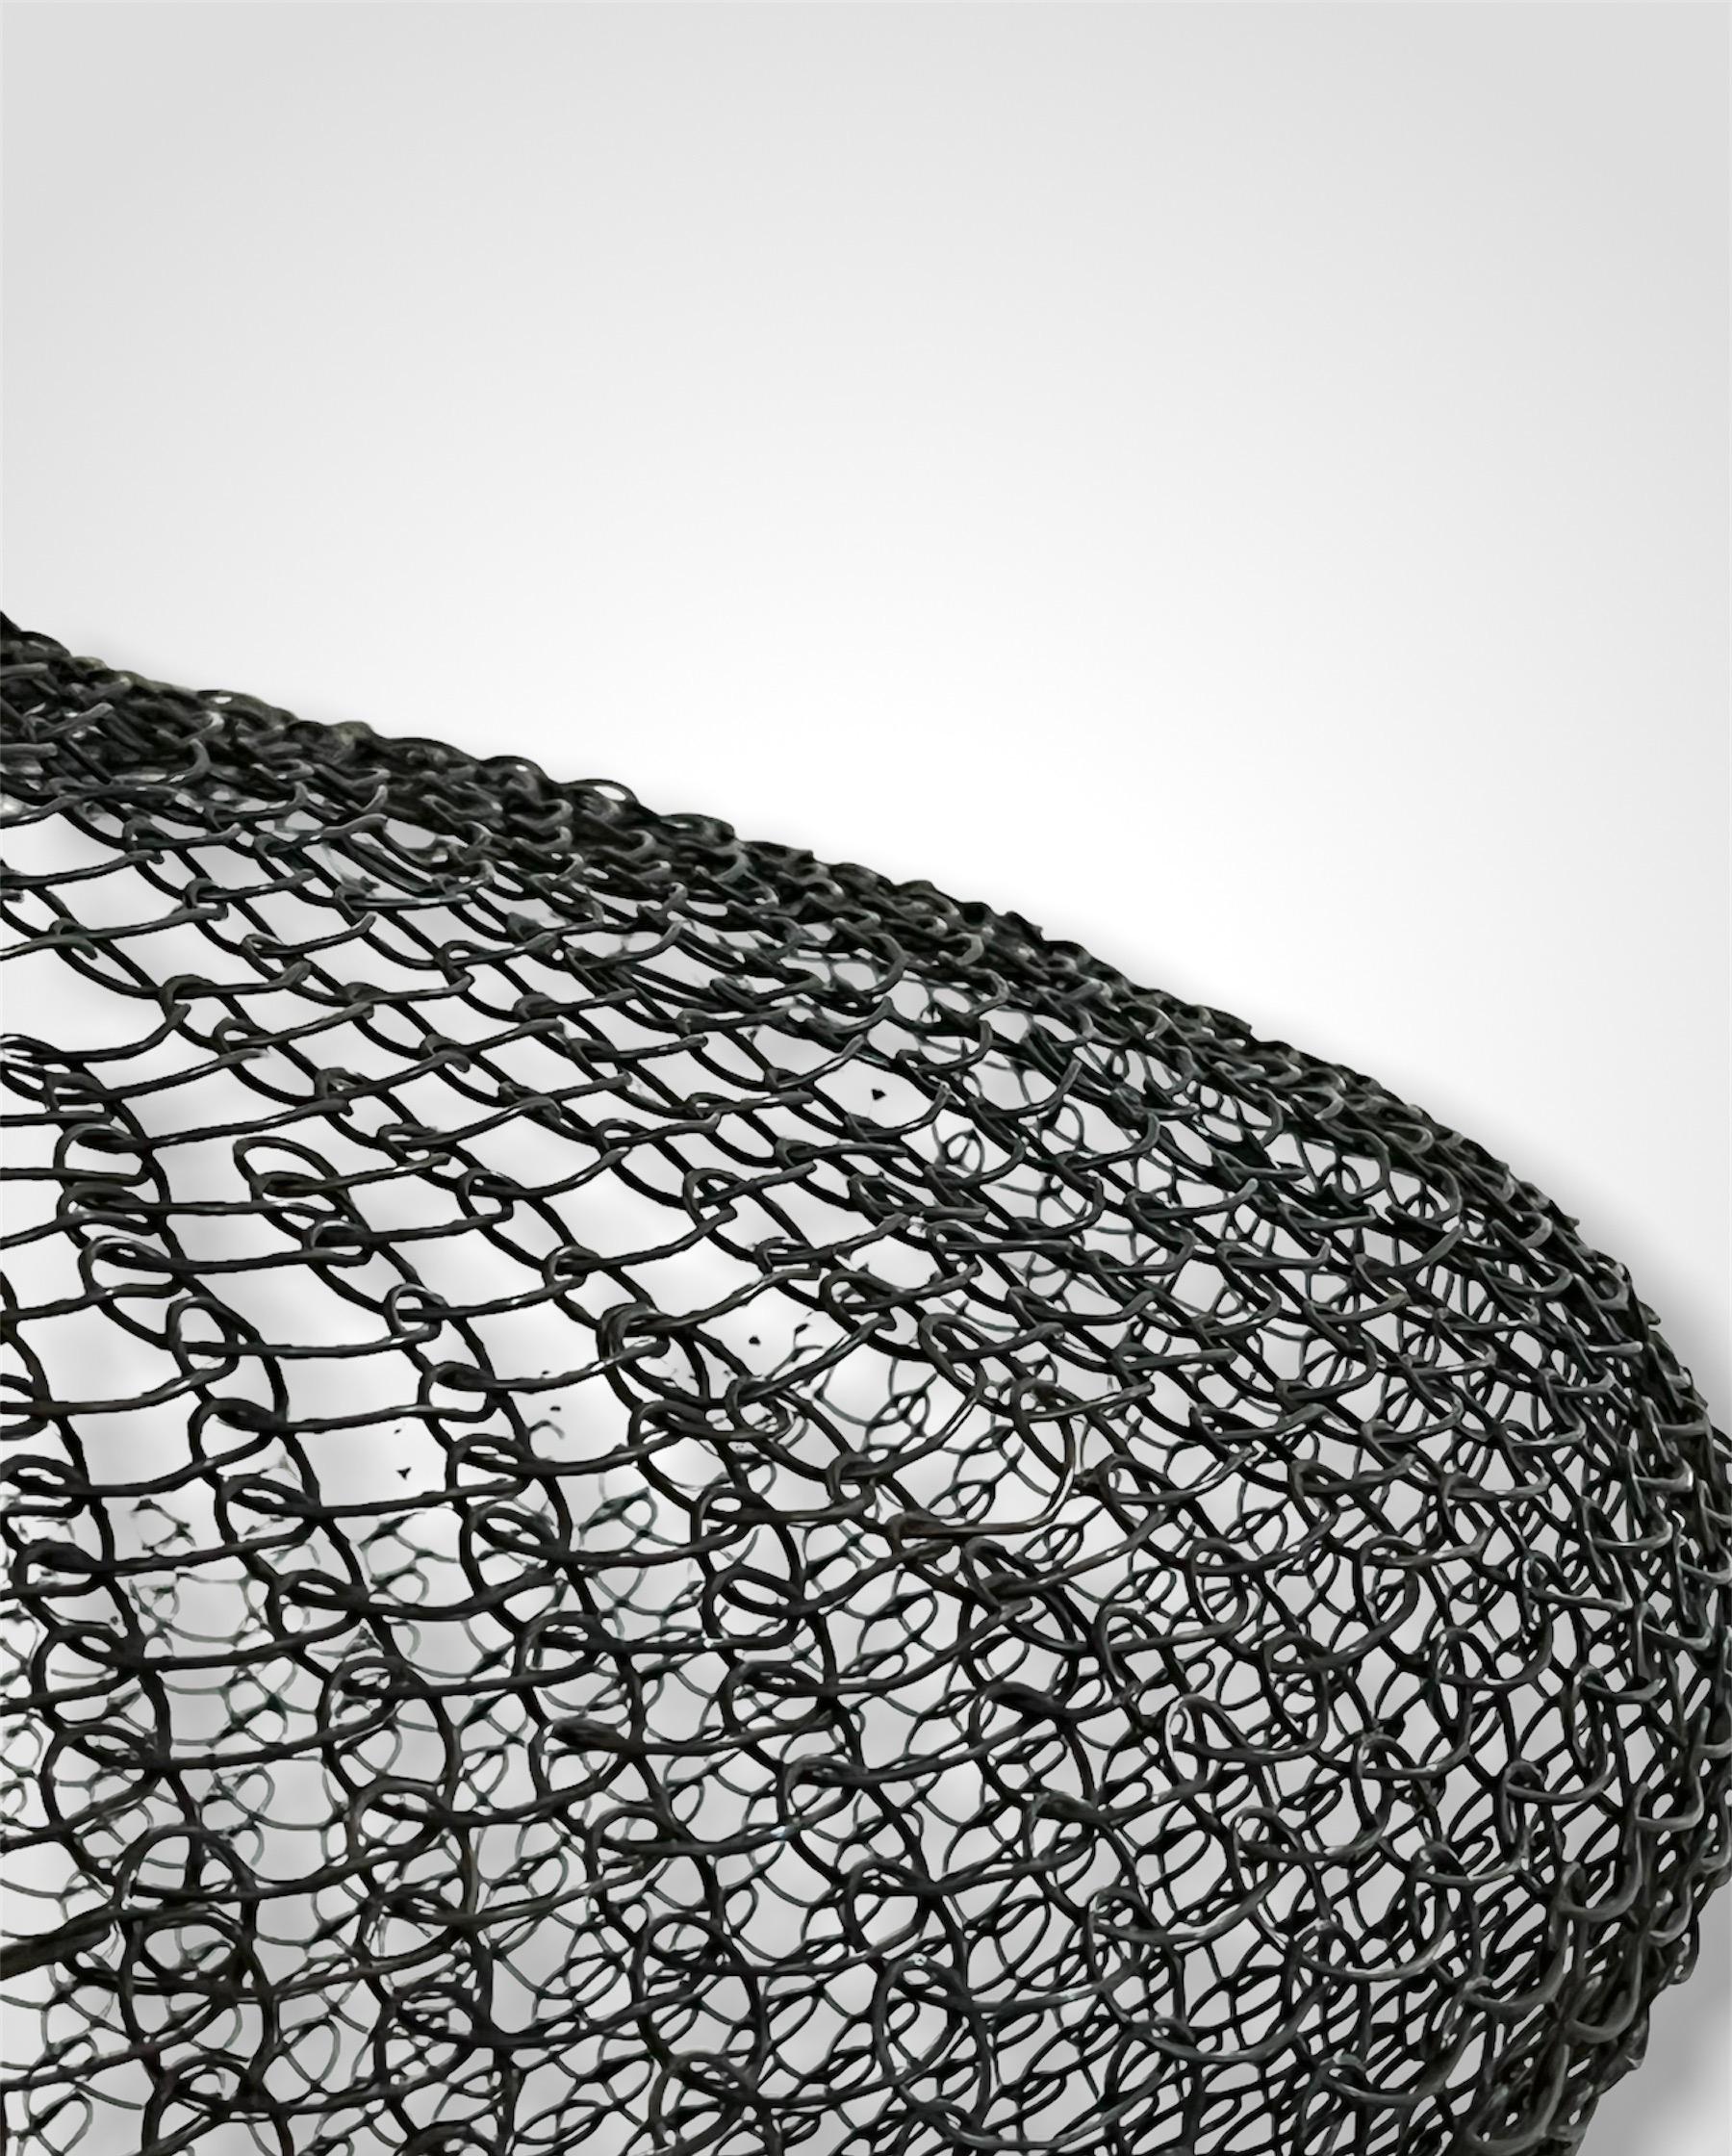 Organic Woven Mesh Wire Sculpture by Ulrikk Dufosse For Sale 2